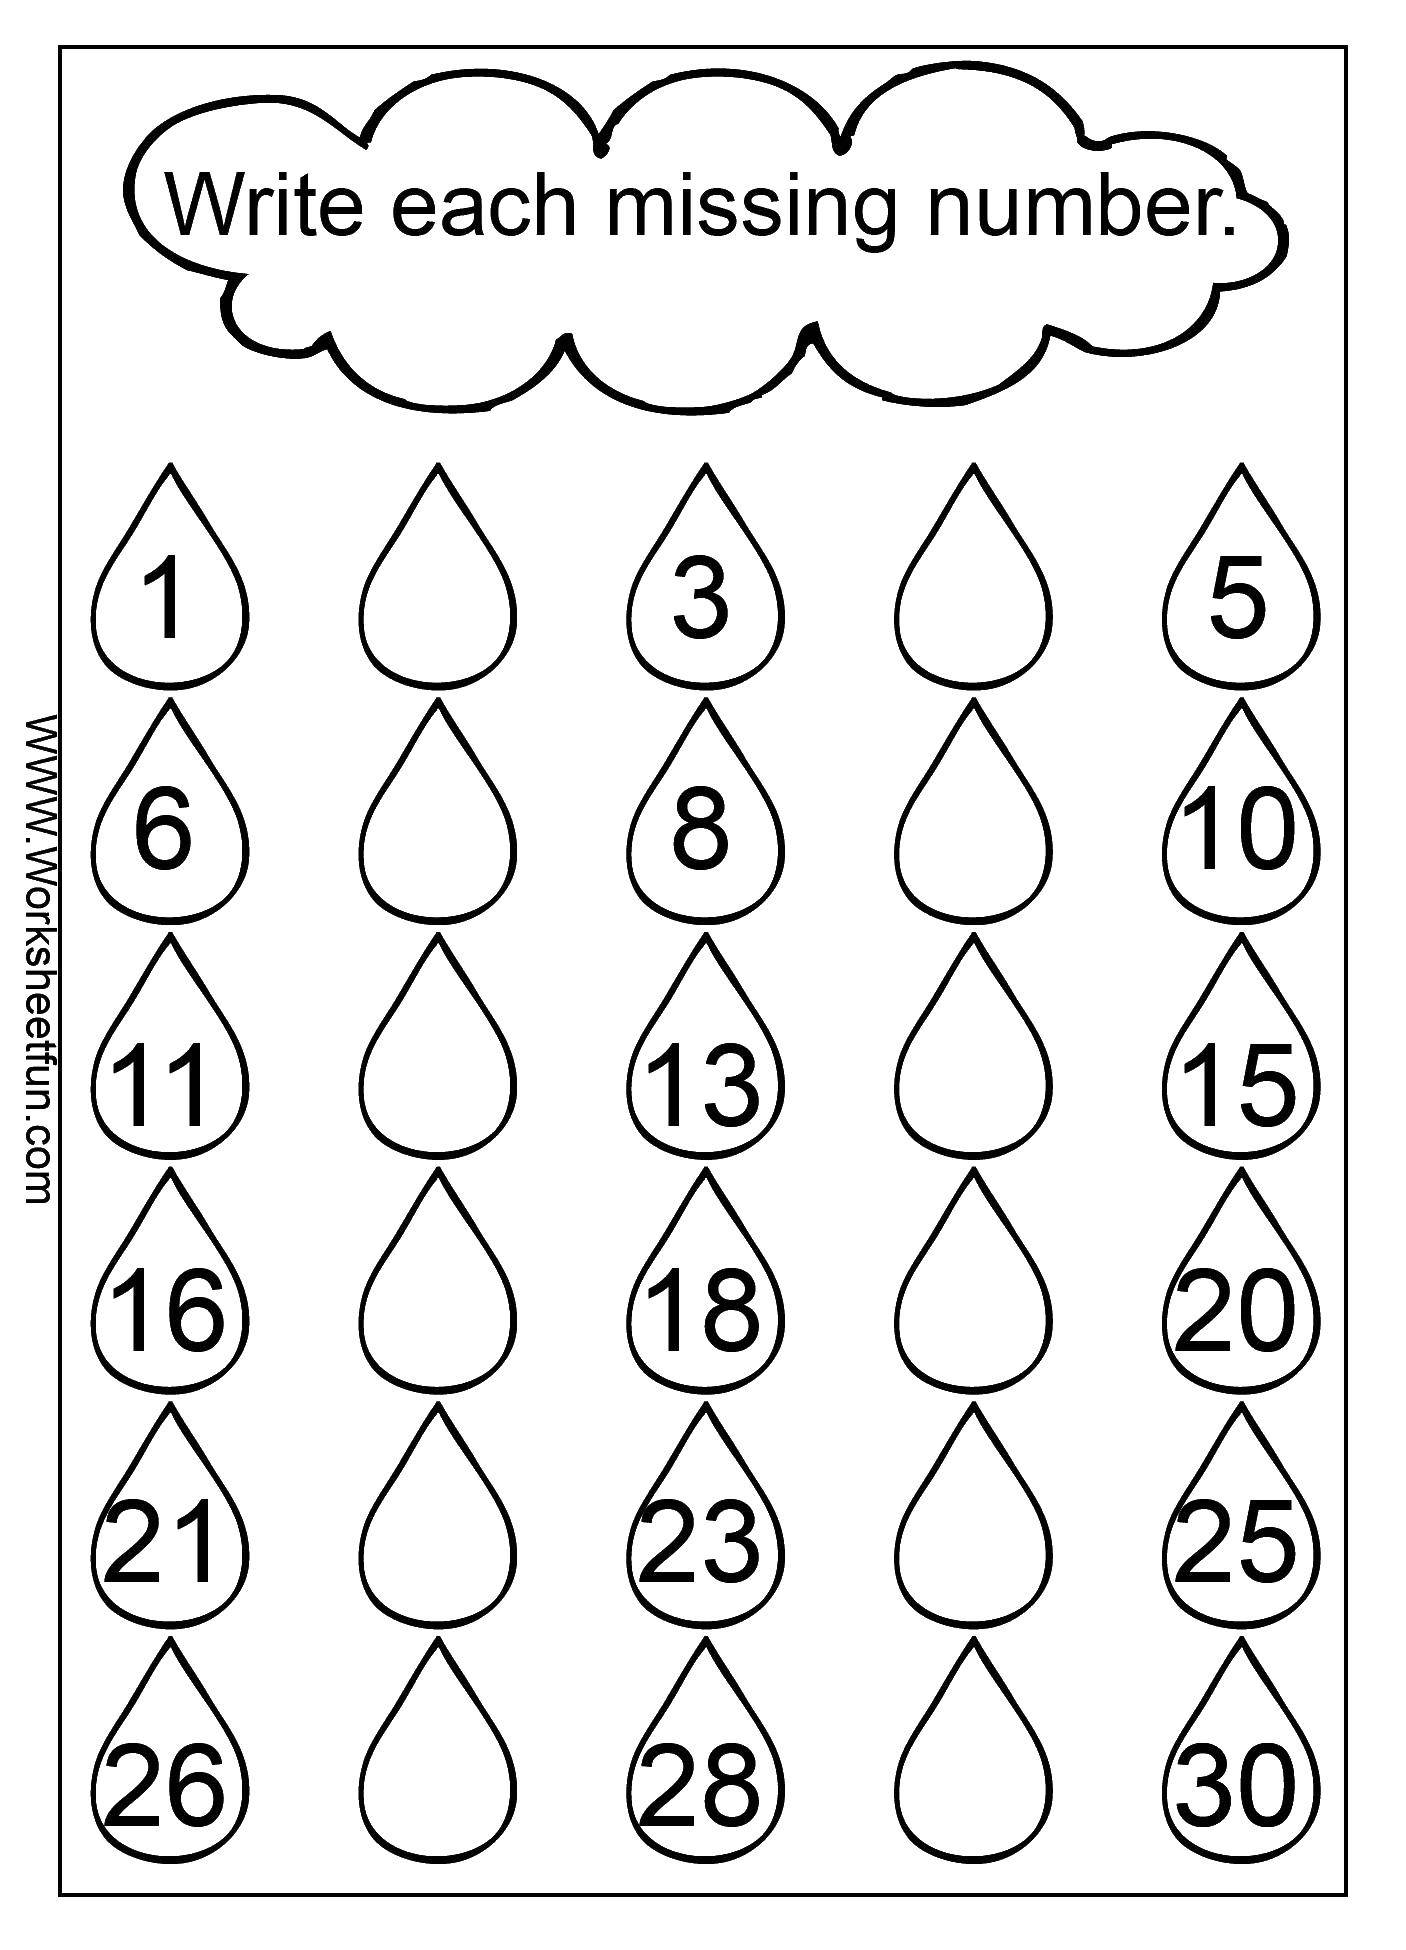 Coloring Enter the missing numbers. Category Learn to count. Tags:  Numbers , account numbers.